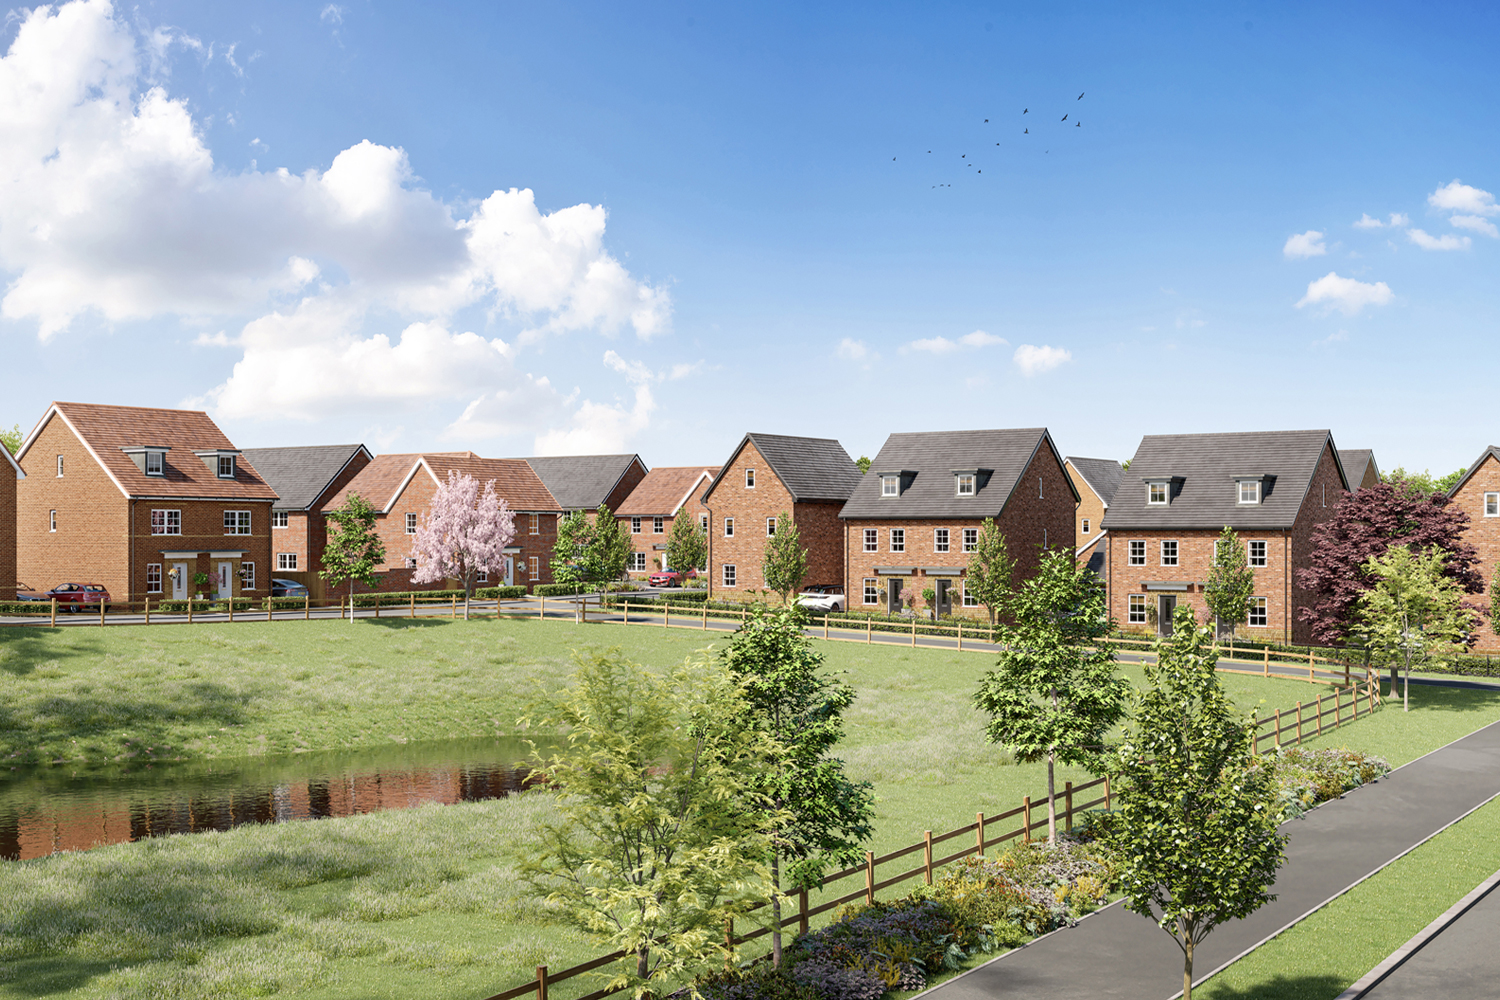 New Homes For Sale In Derbyshire East Midlands Barratt Homes